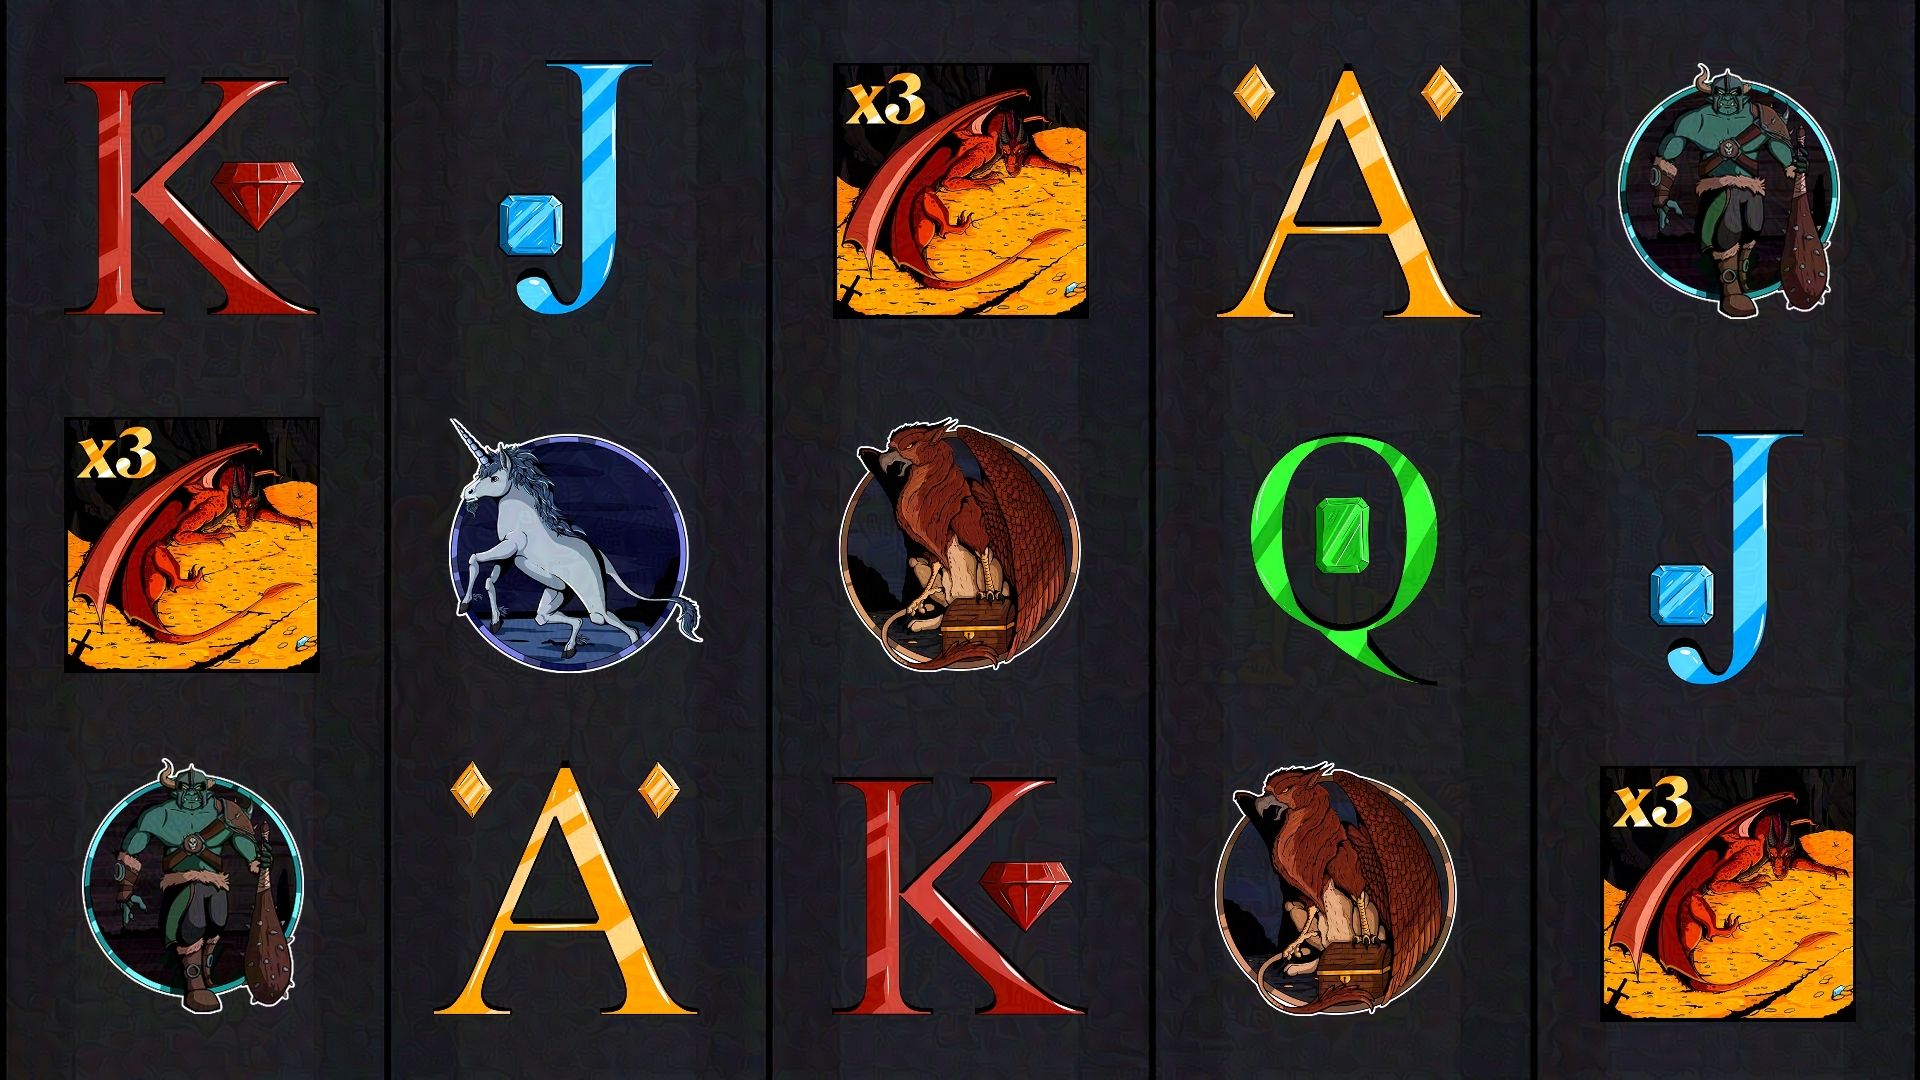 A mockup of a slot reel featuring the icons created.